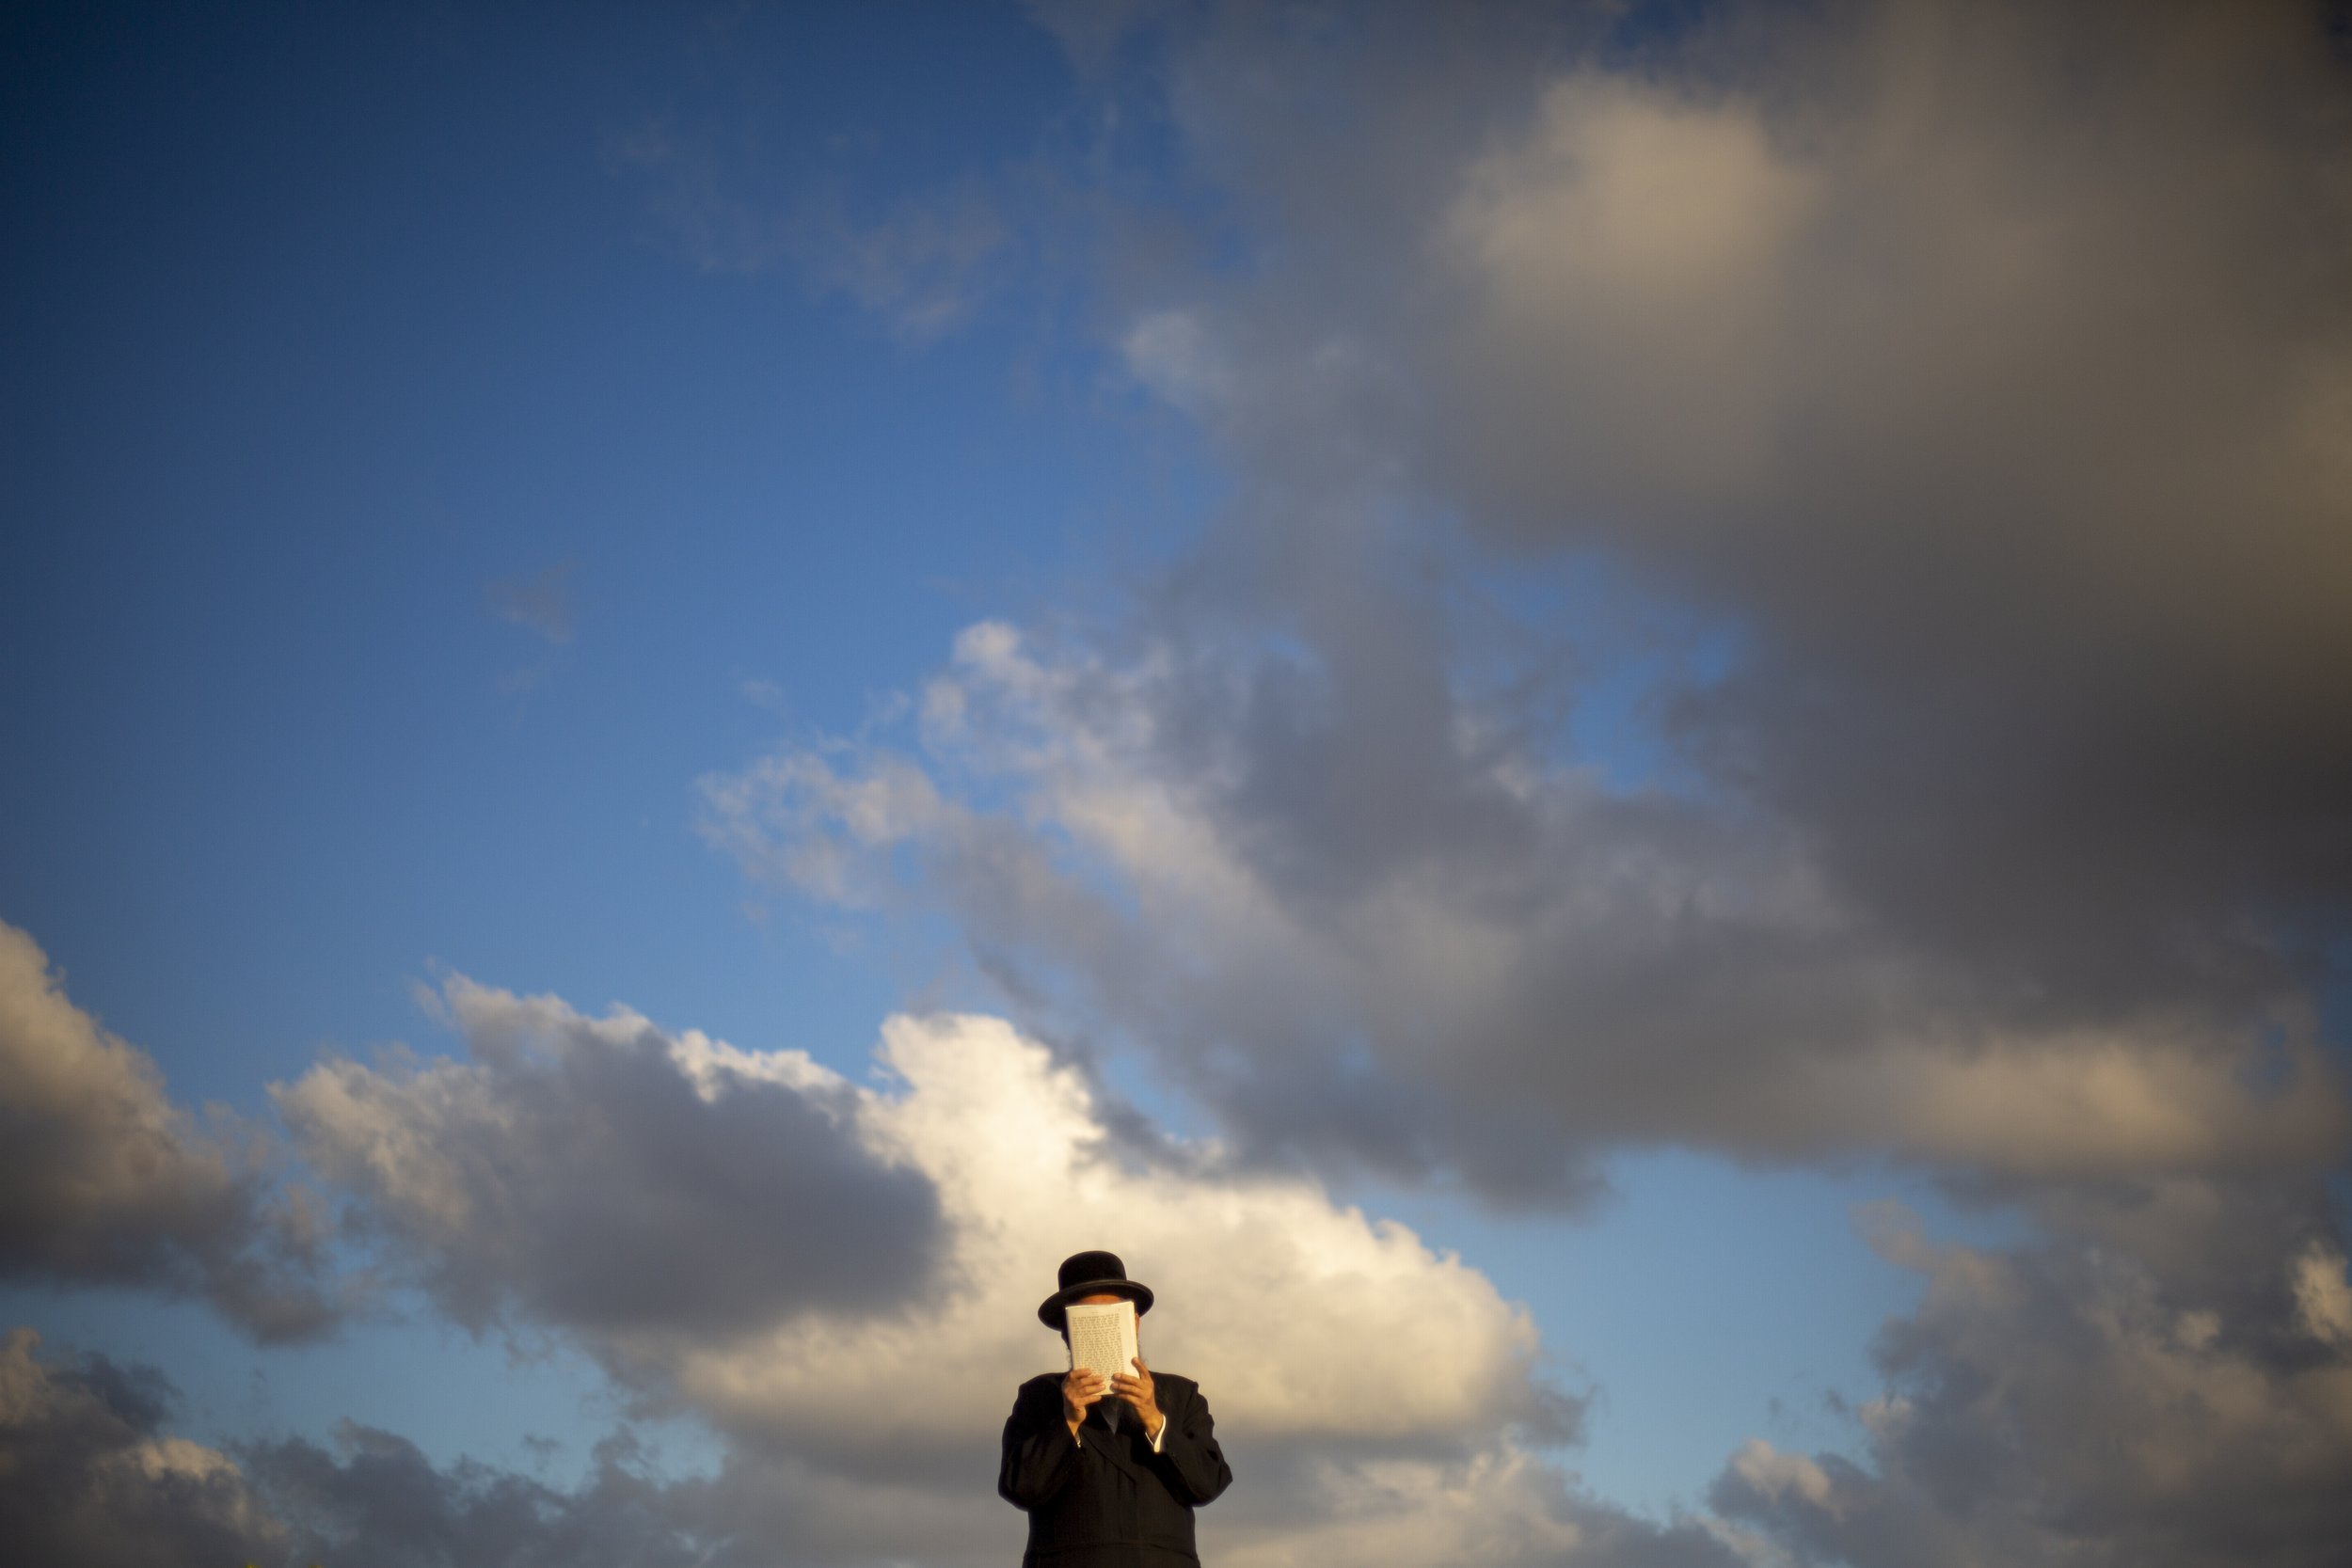  An Ultra-Orthodox Jewish man from the Kiryat Sanz Hassidic sect prays on a hill overlooking the Mediterranean Sea during a Tashlich ceremony in Netanya, Israel, on Sept. 14, 2021. Tashlich, which means "to cast away" in Hebrew, is the practice in wh